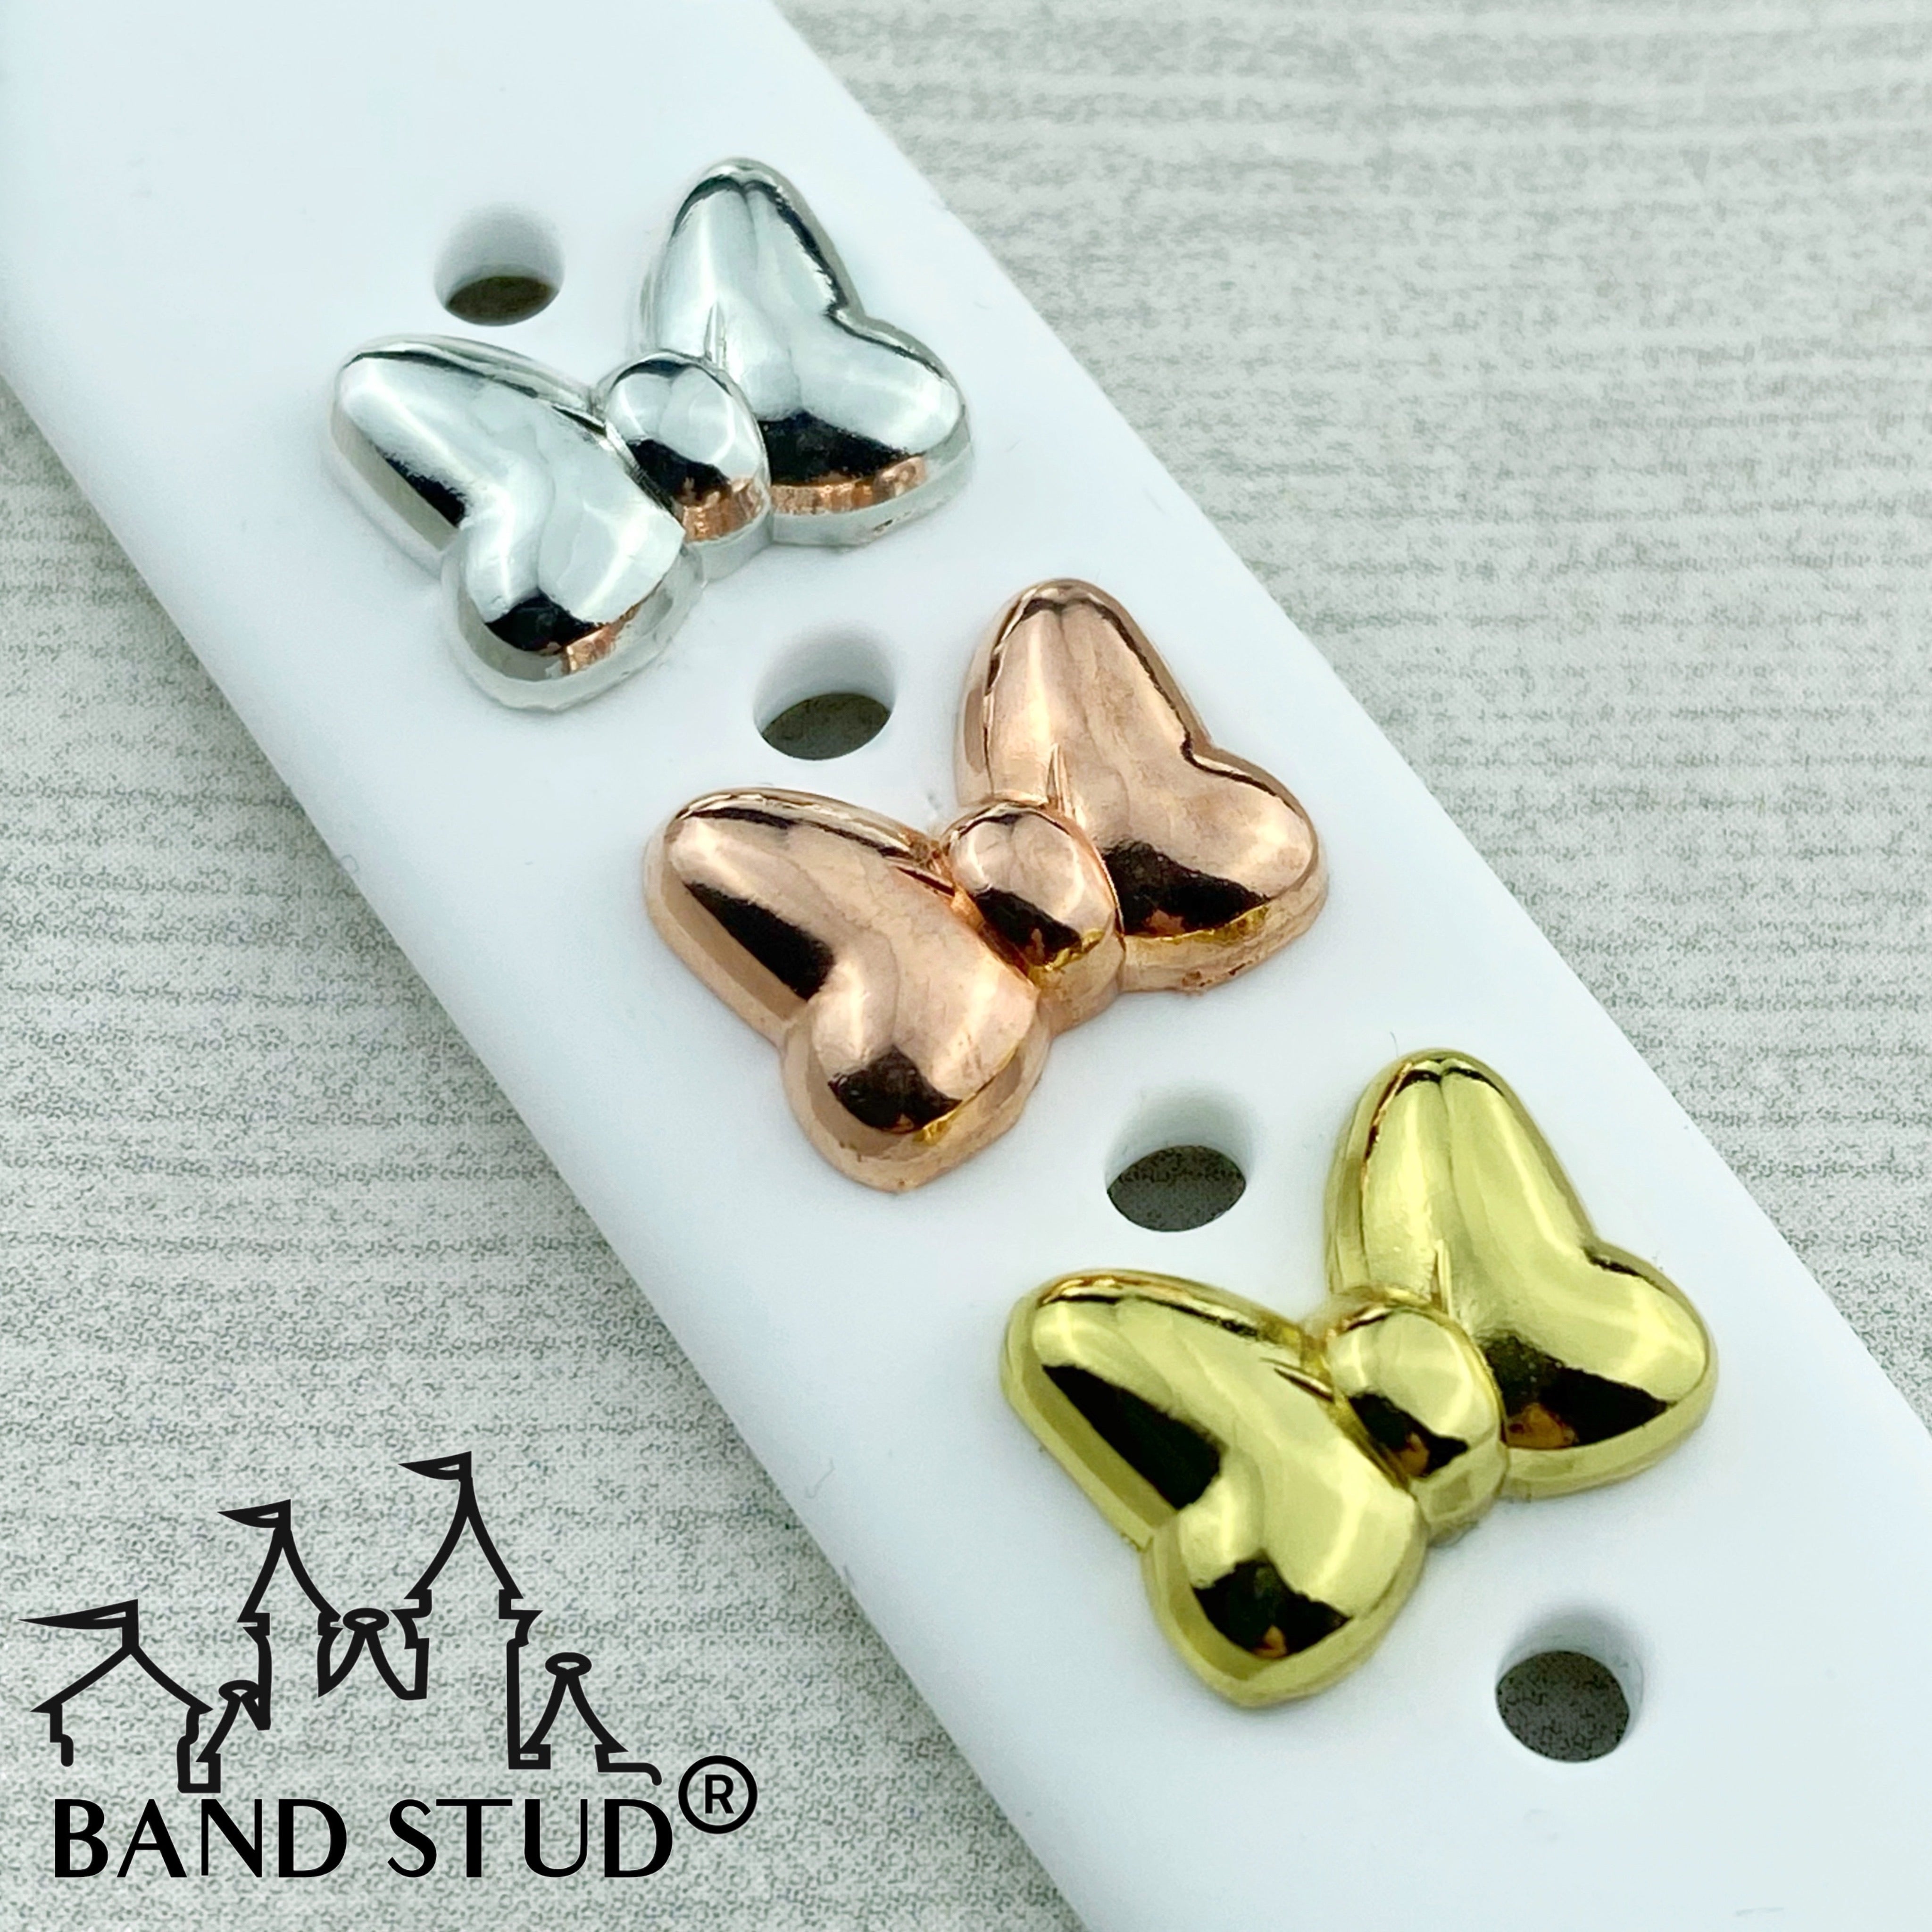 Band Stud® - It's all about the Bow (V2)